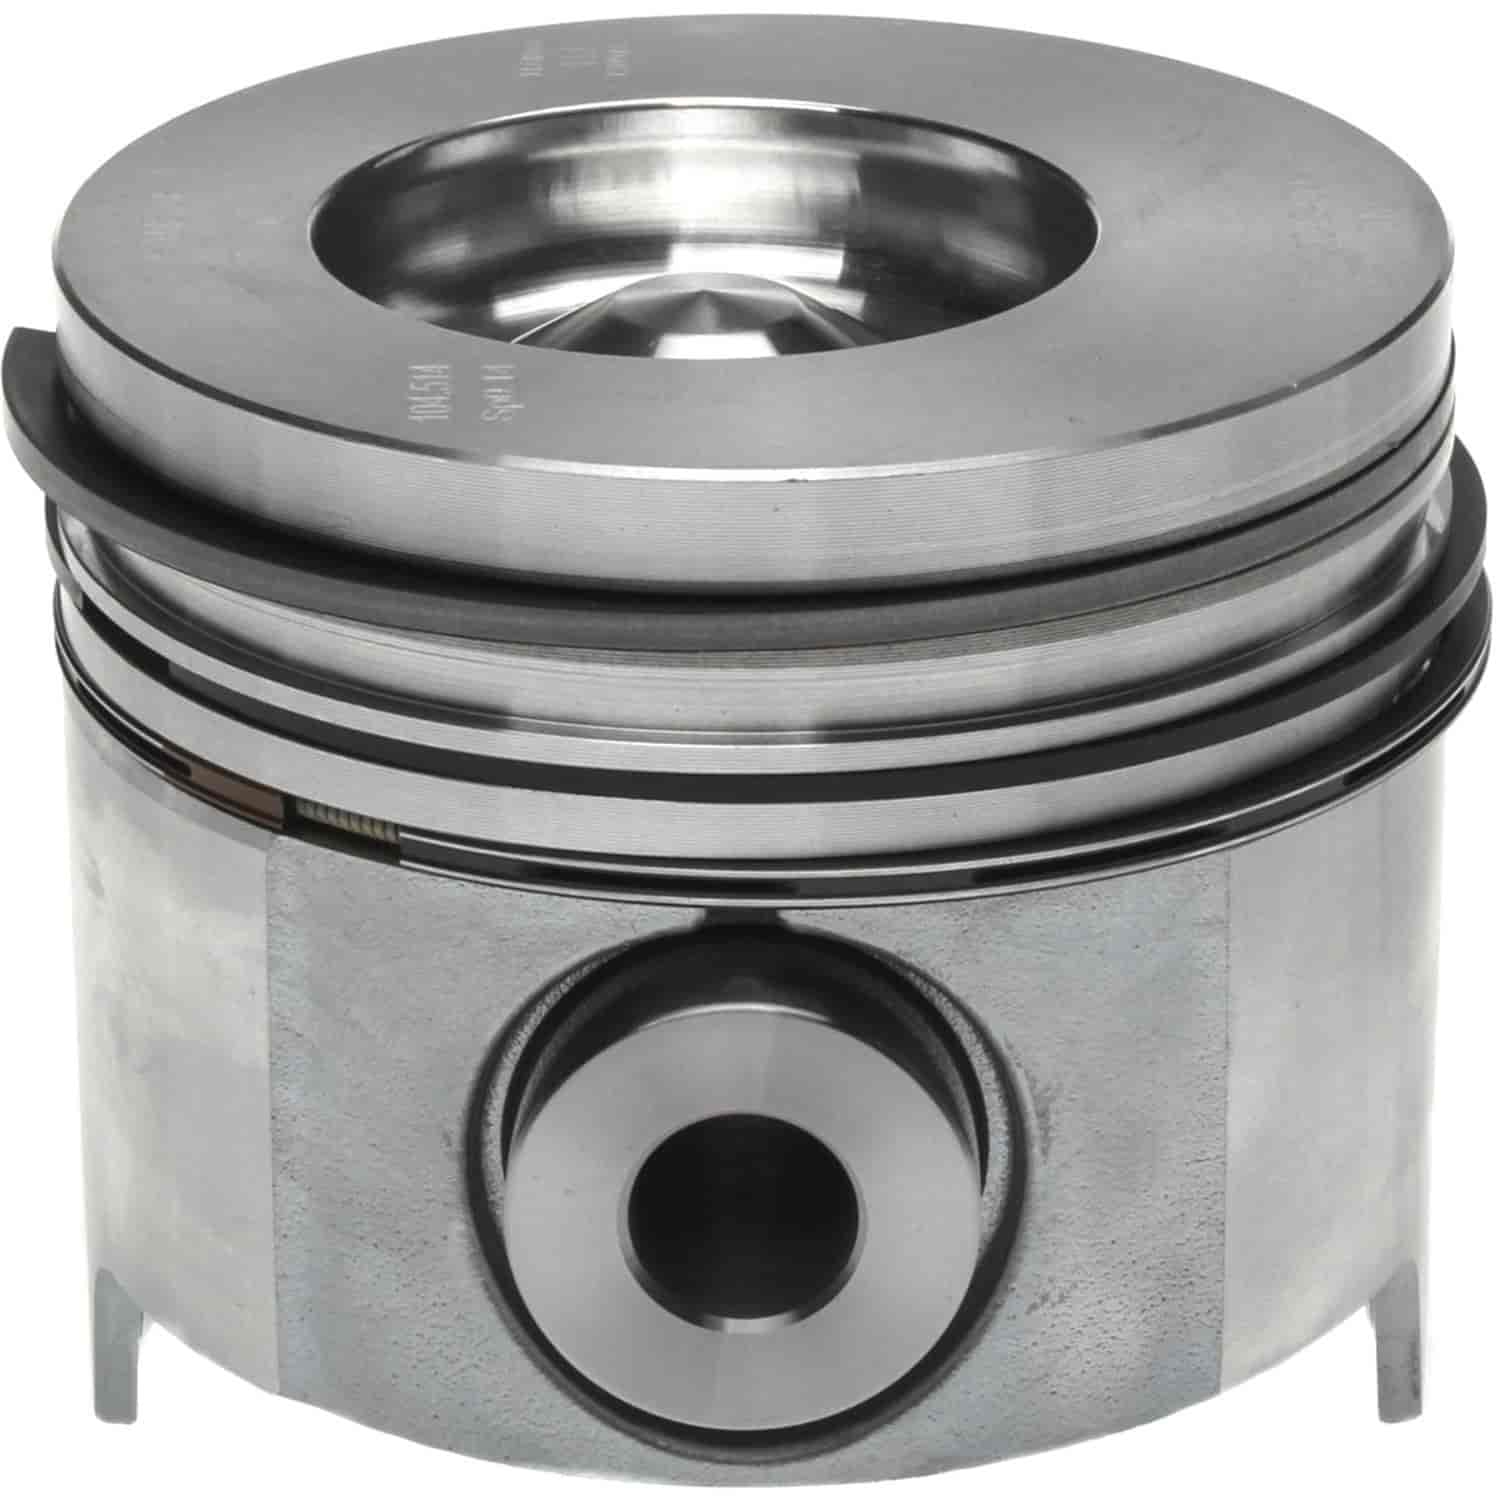 Piston With Rings 1994-2003 Ford/Navistar Powerstroke Diesel V8 7.3L with 4.130" Bore (+.020") Reduced Compression